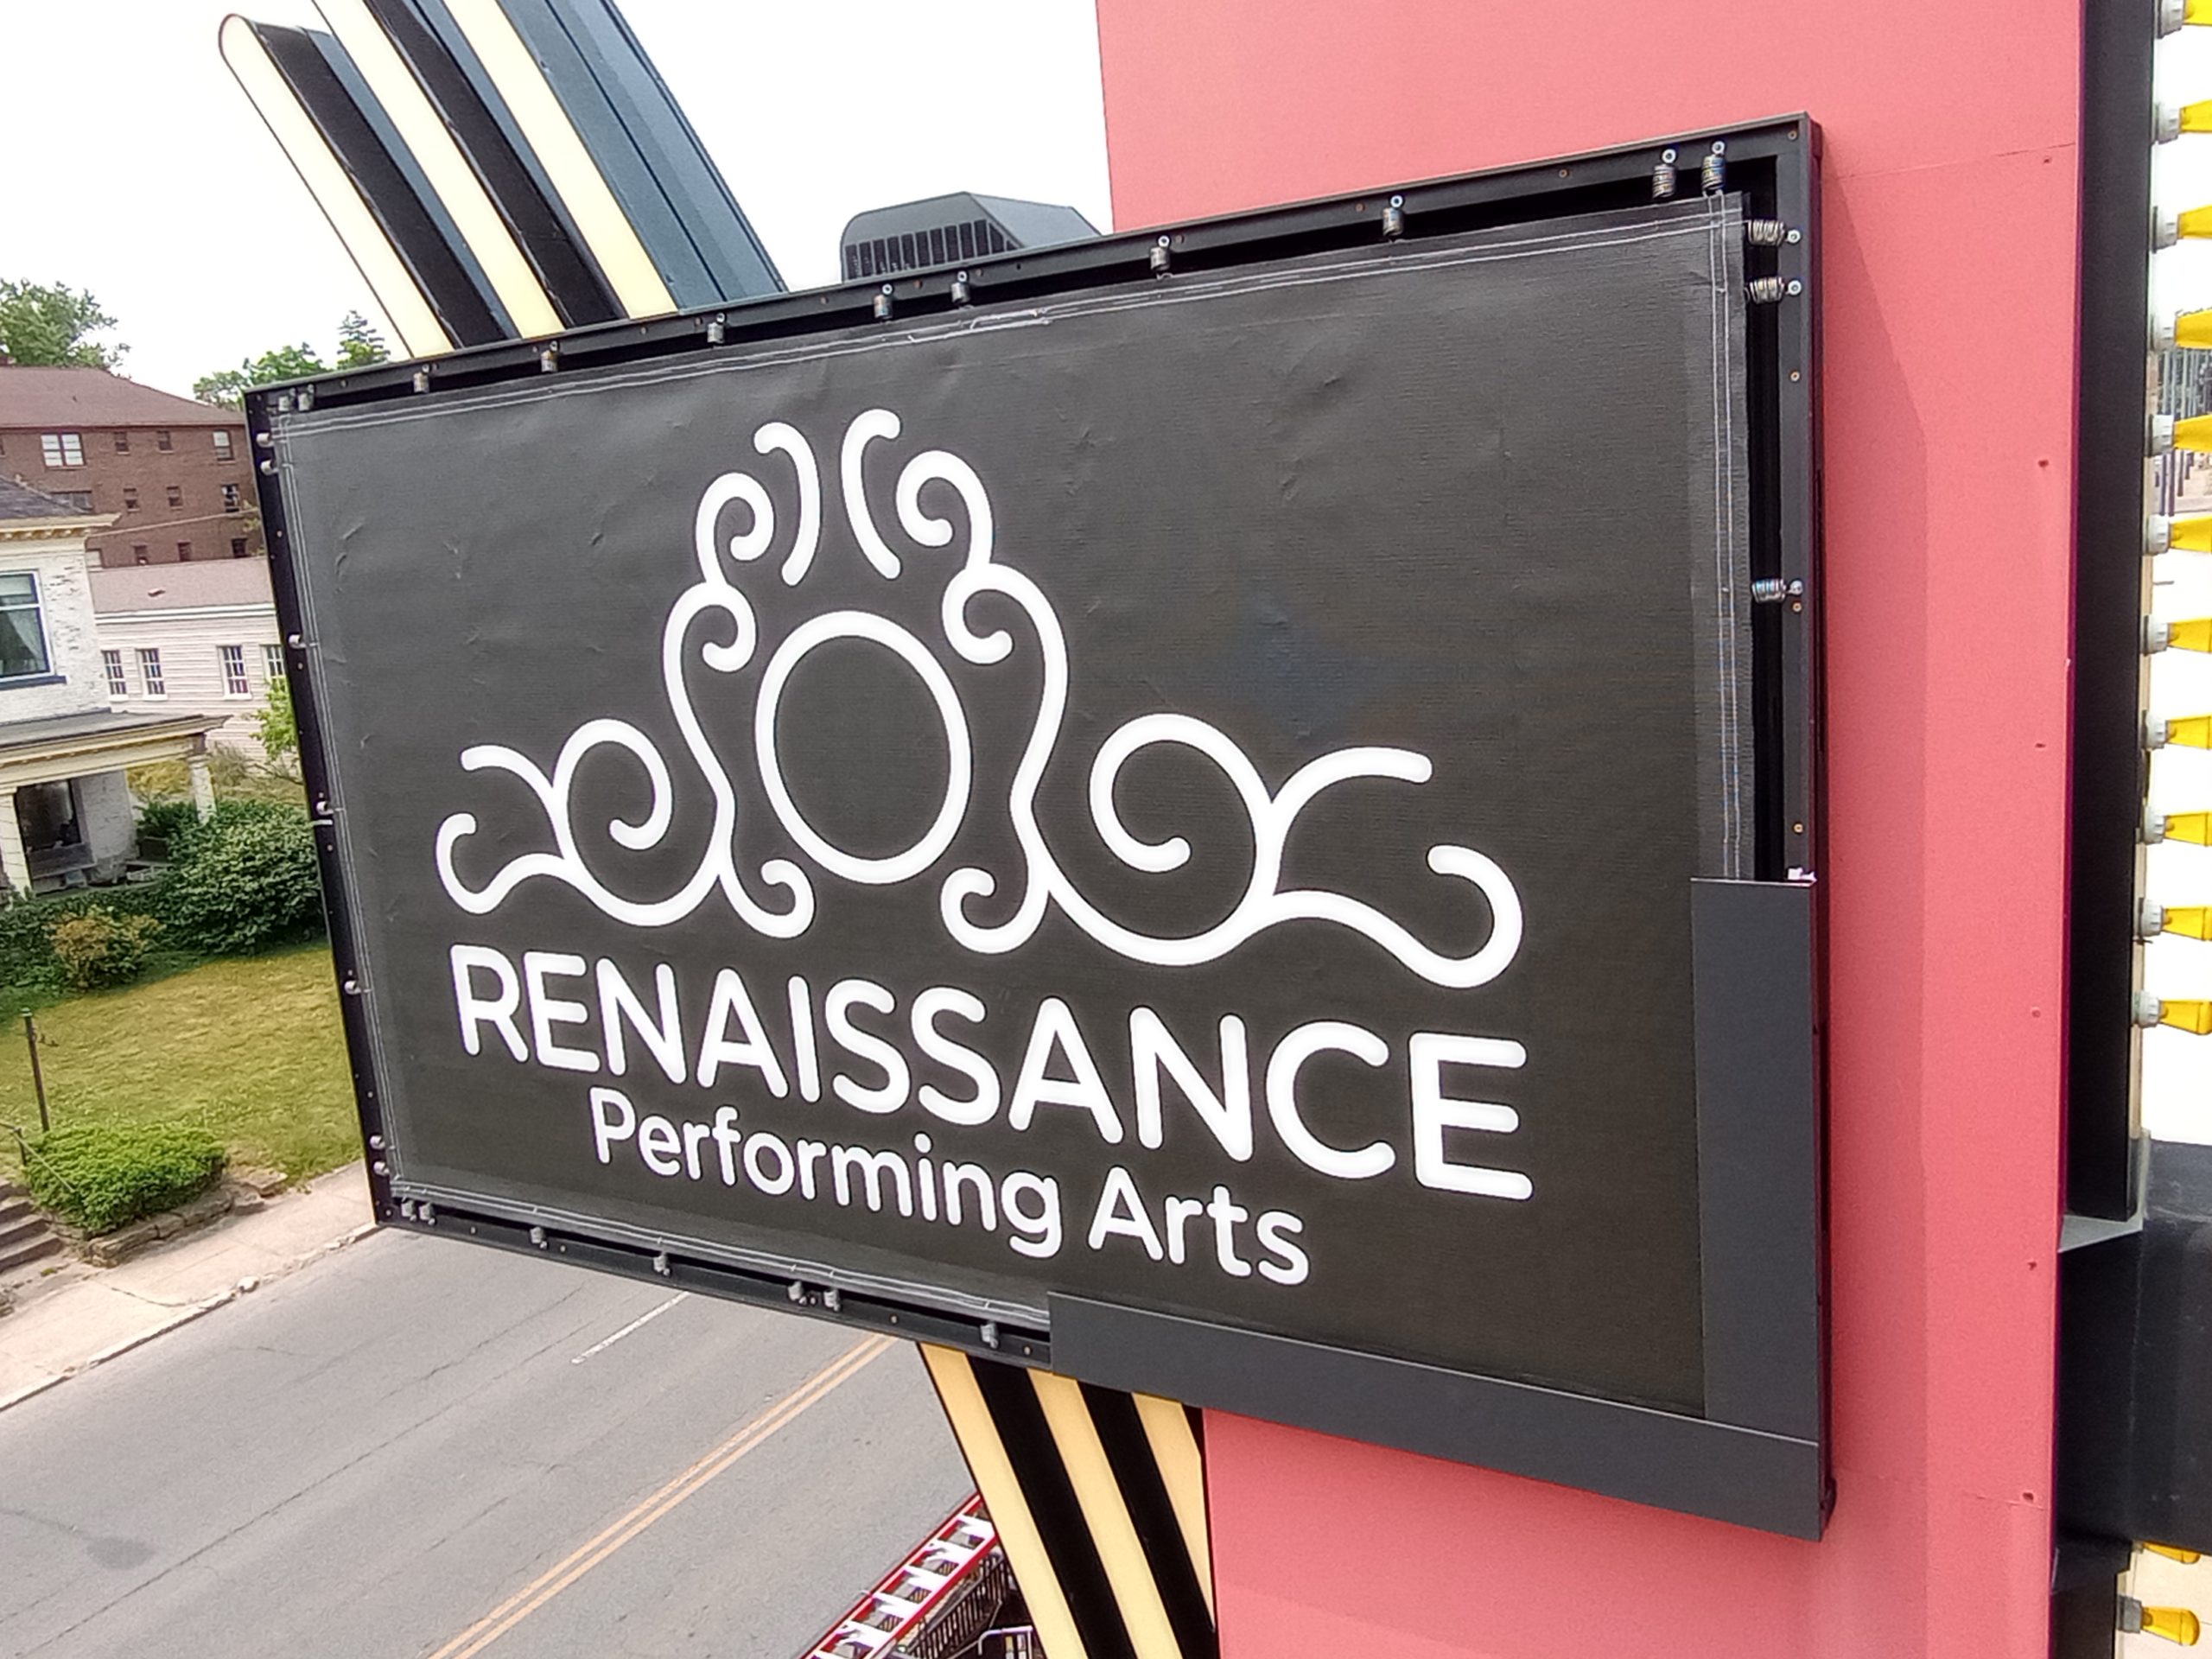 Renaissance-Theatre-Broken-Digital-Problem-Solved-BannerFrame-CLASSIC-goes-Install-cover-sections-scaled When A Digital Sign Goes Bad, It's Time to Go Old School